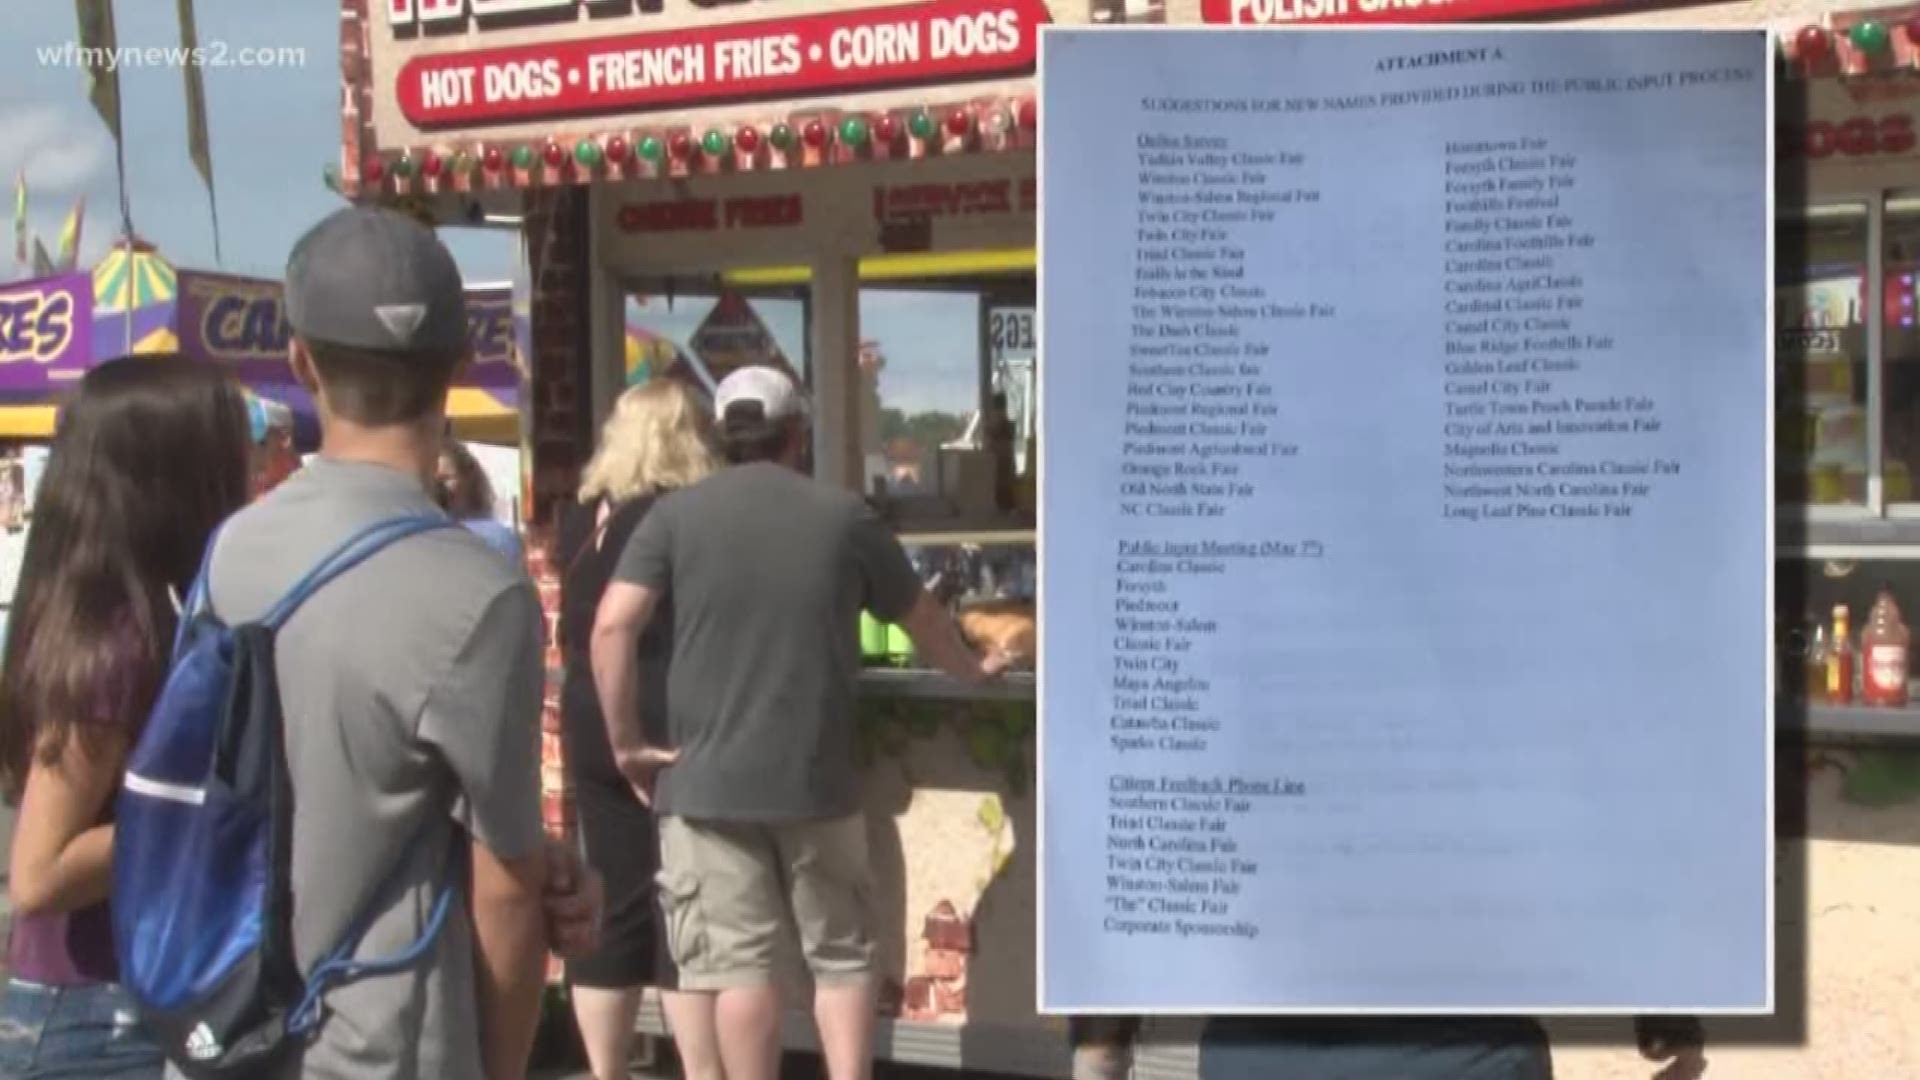 There are 55 suggestions listed that are being considered to replace the name of the Dixie Classic Fair, but there's no guarantee a name from that list will be chosen.